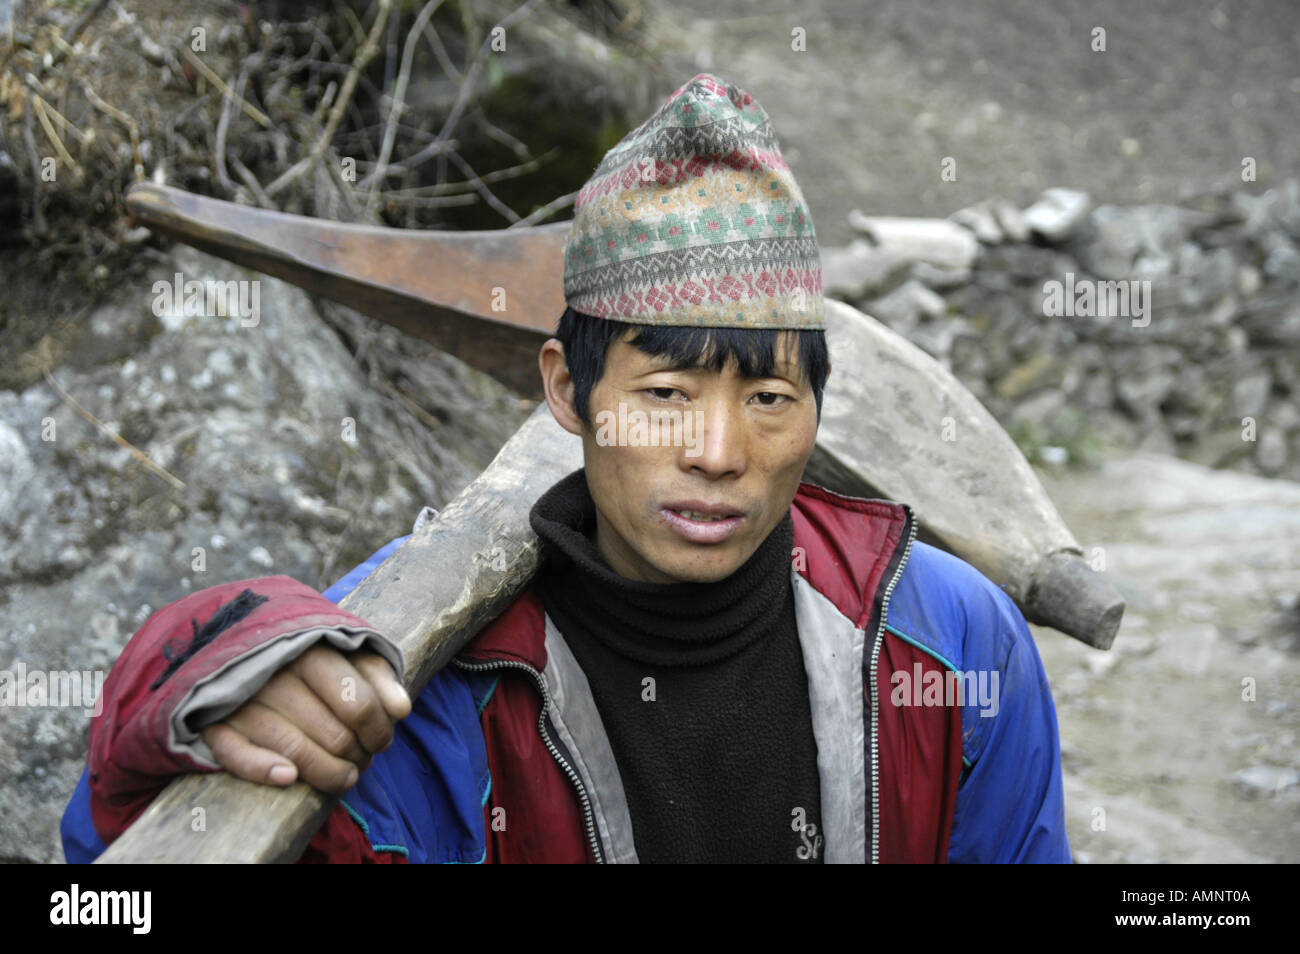 Man wearing a traditional hat carries a plow Karte Annapurna Region Nepal Stock Photo